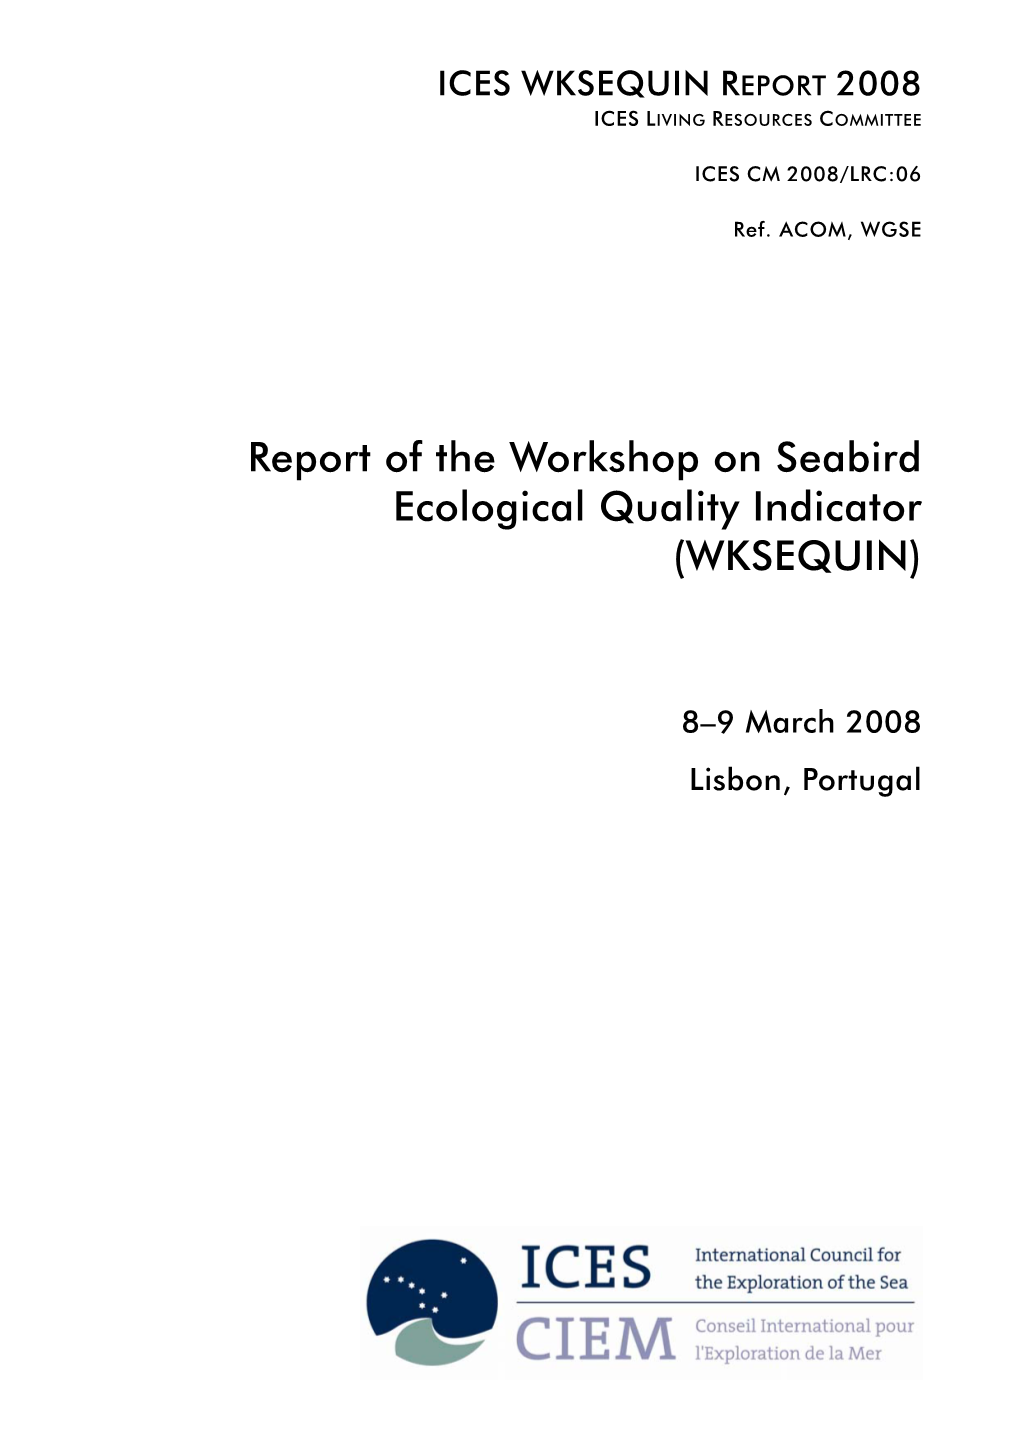 Report of the Workshop on Seabird Ecological Quality Indicator (WKSEQUIN)